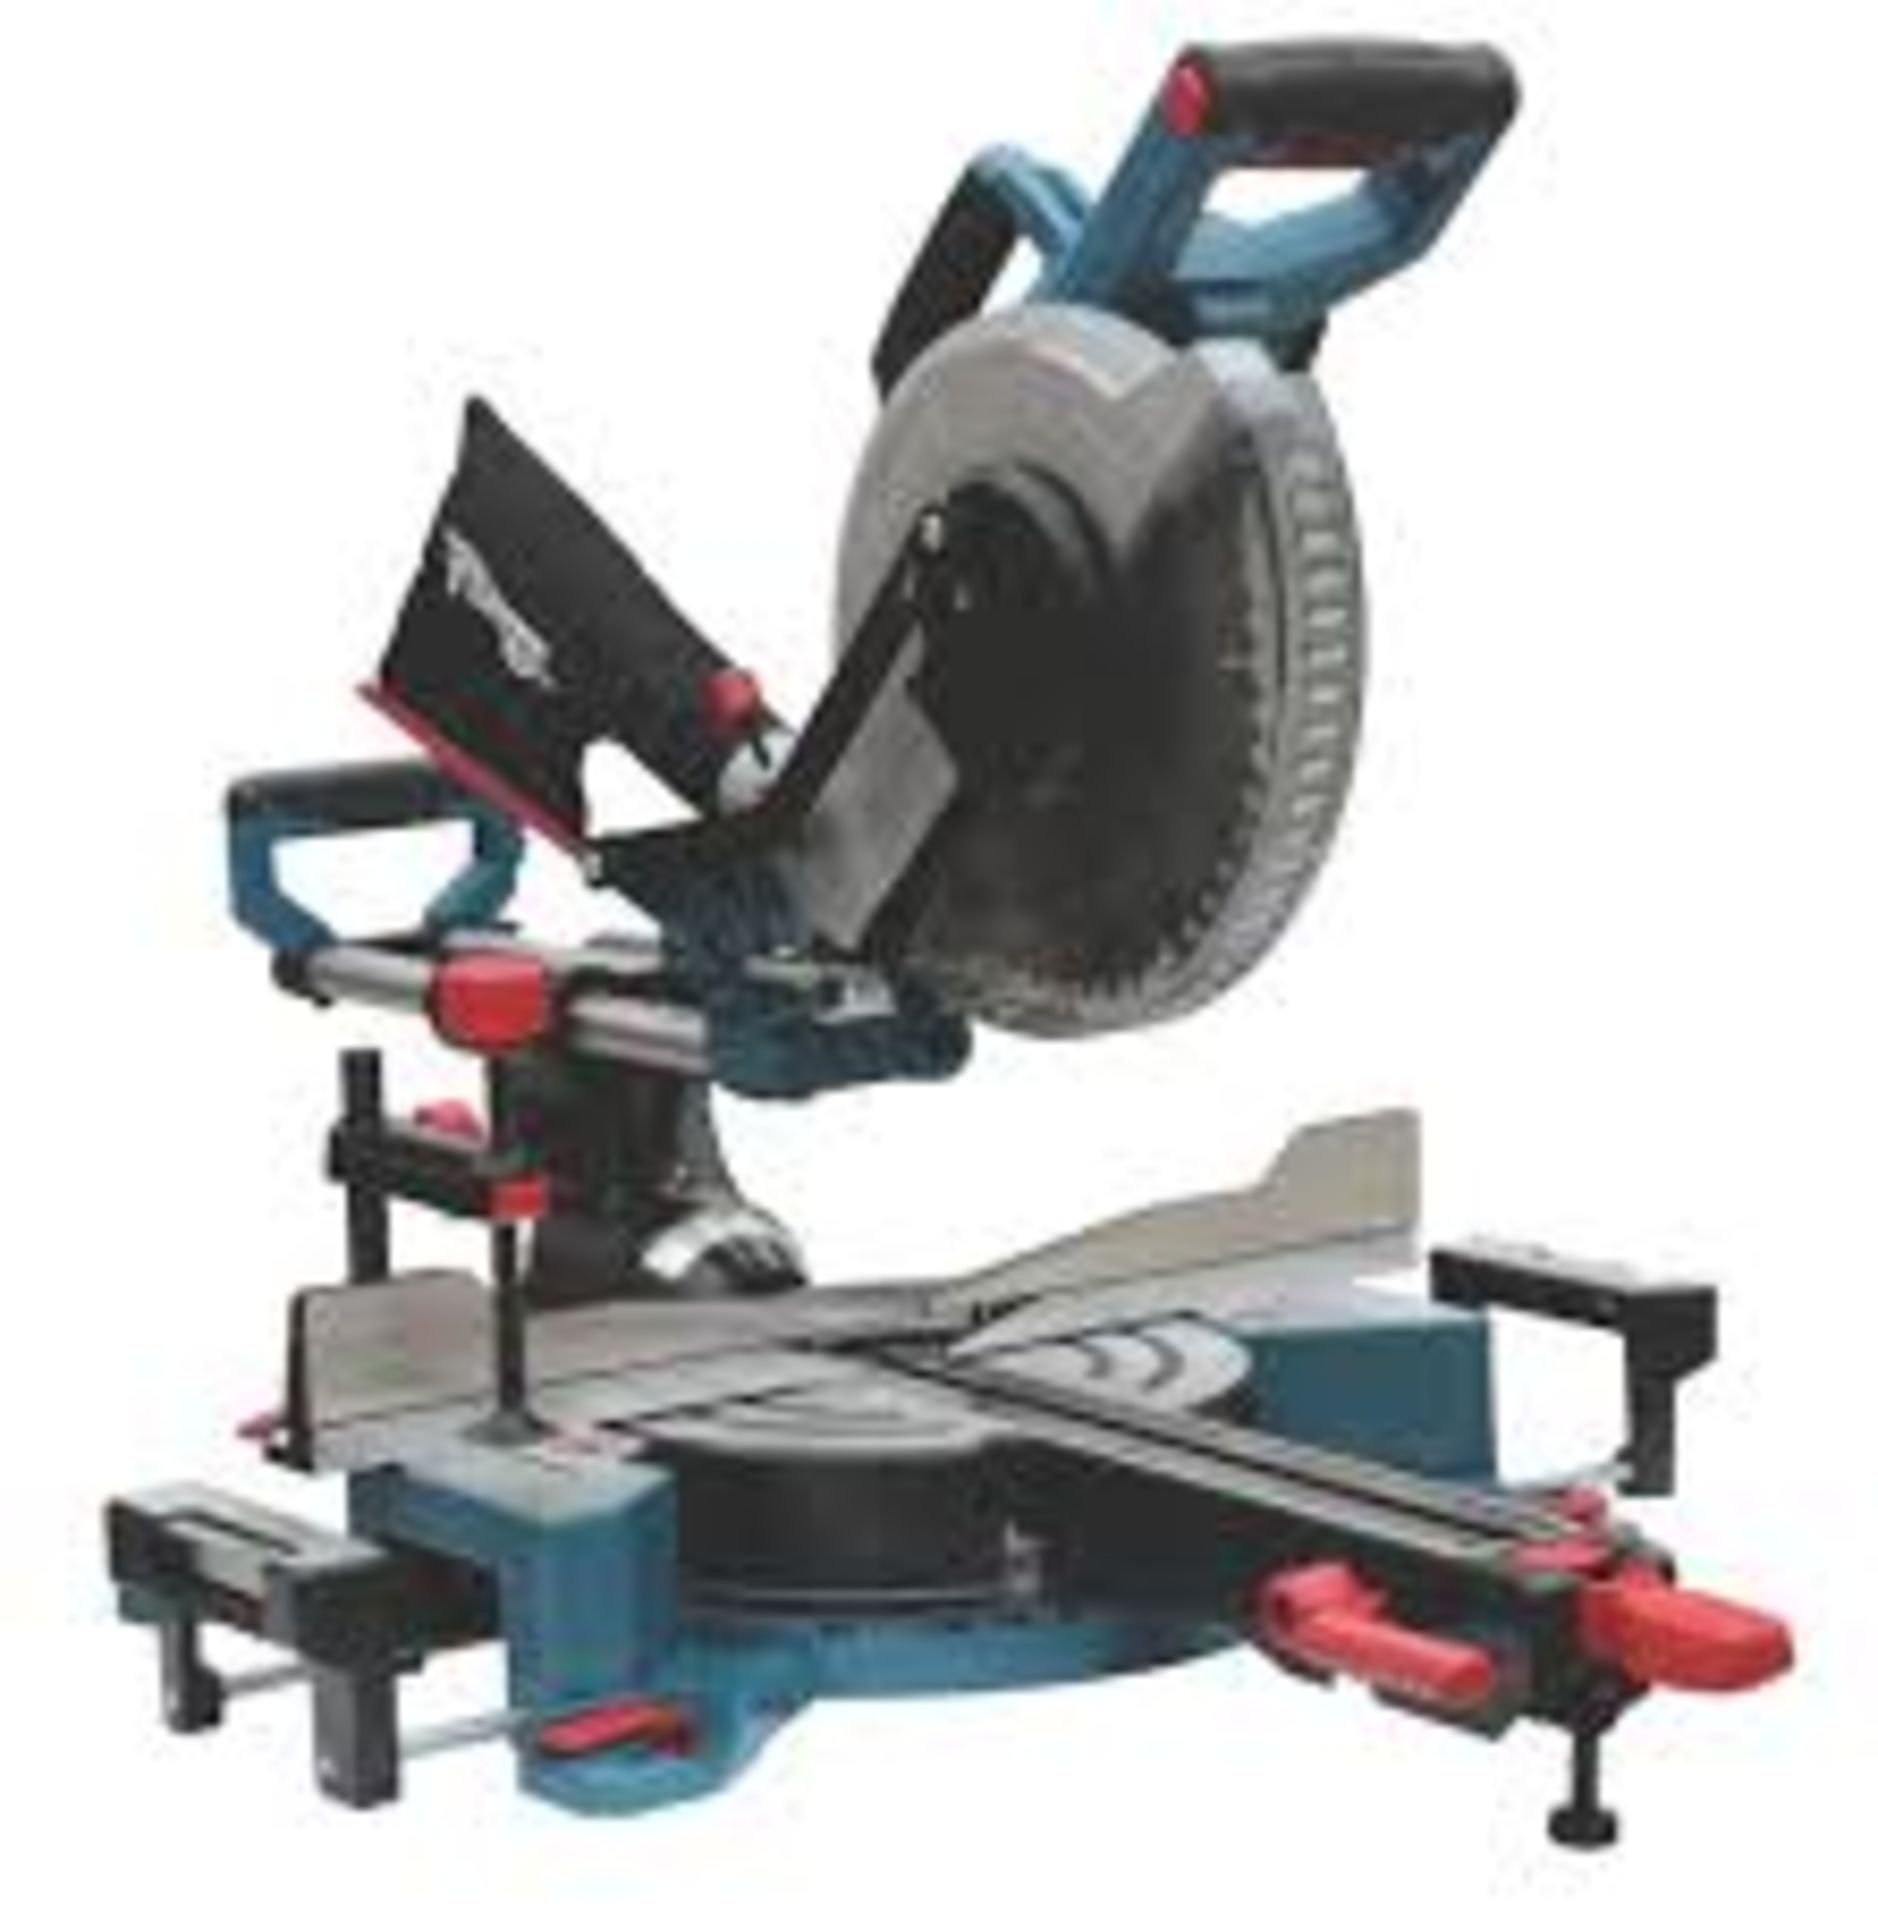 Erbauer EMIS254S 254mm Electric Double-Bevel Sliding Mitre Saw. - PW. Double-bevel sliding mitre saw